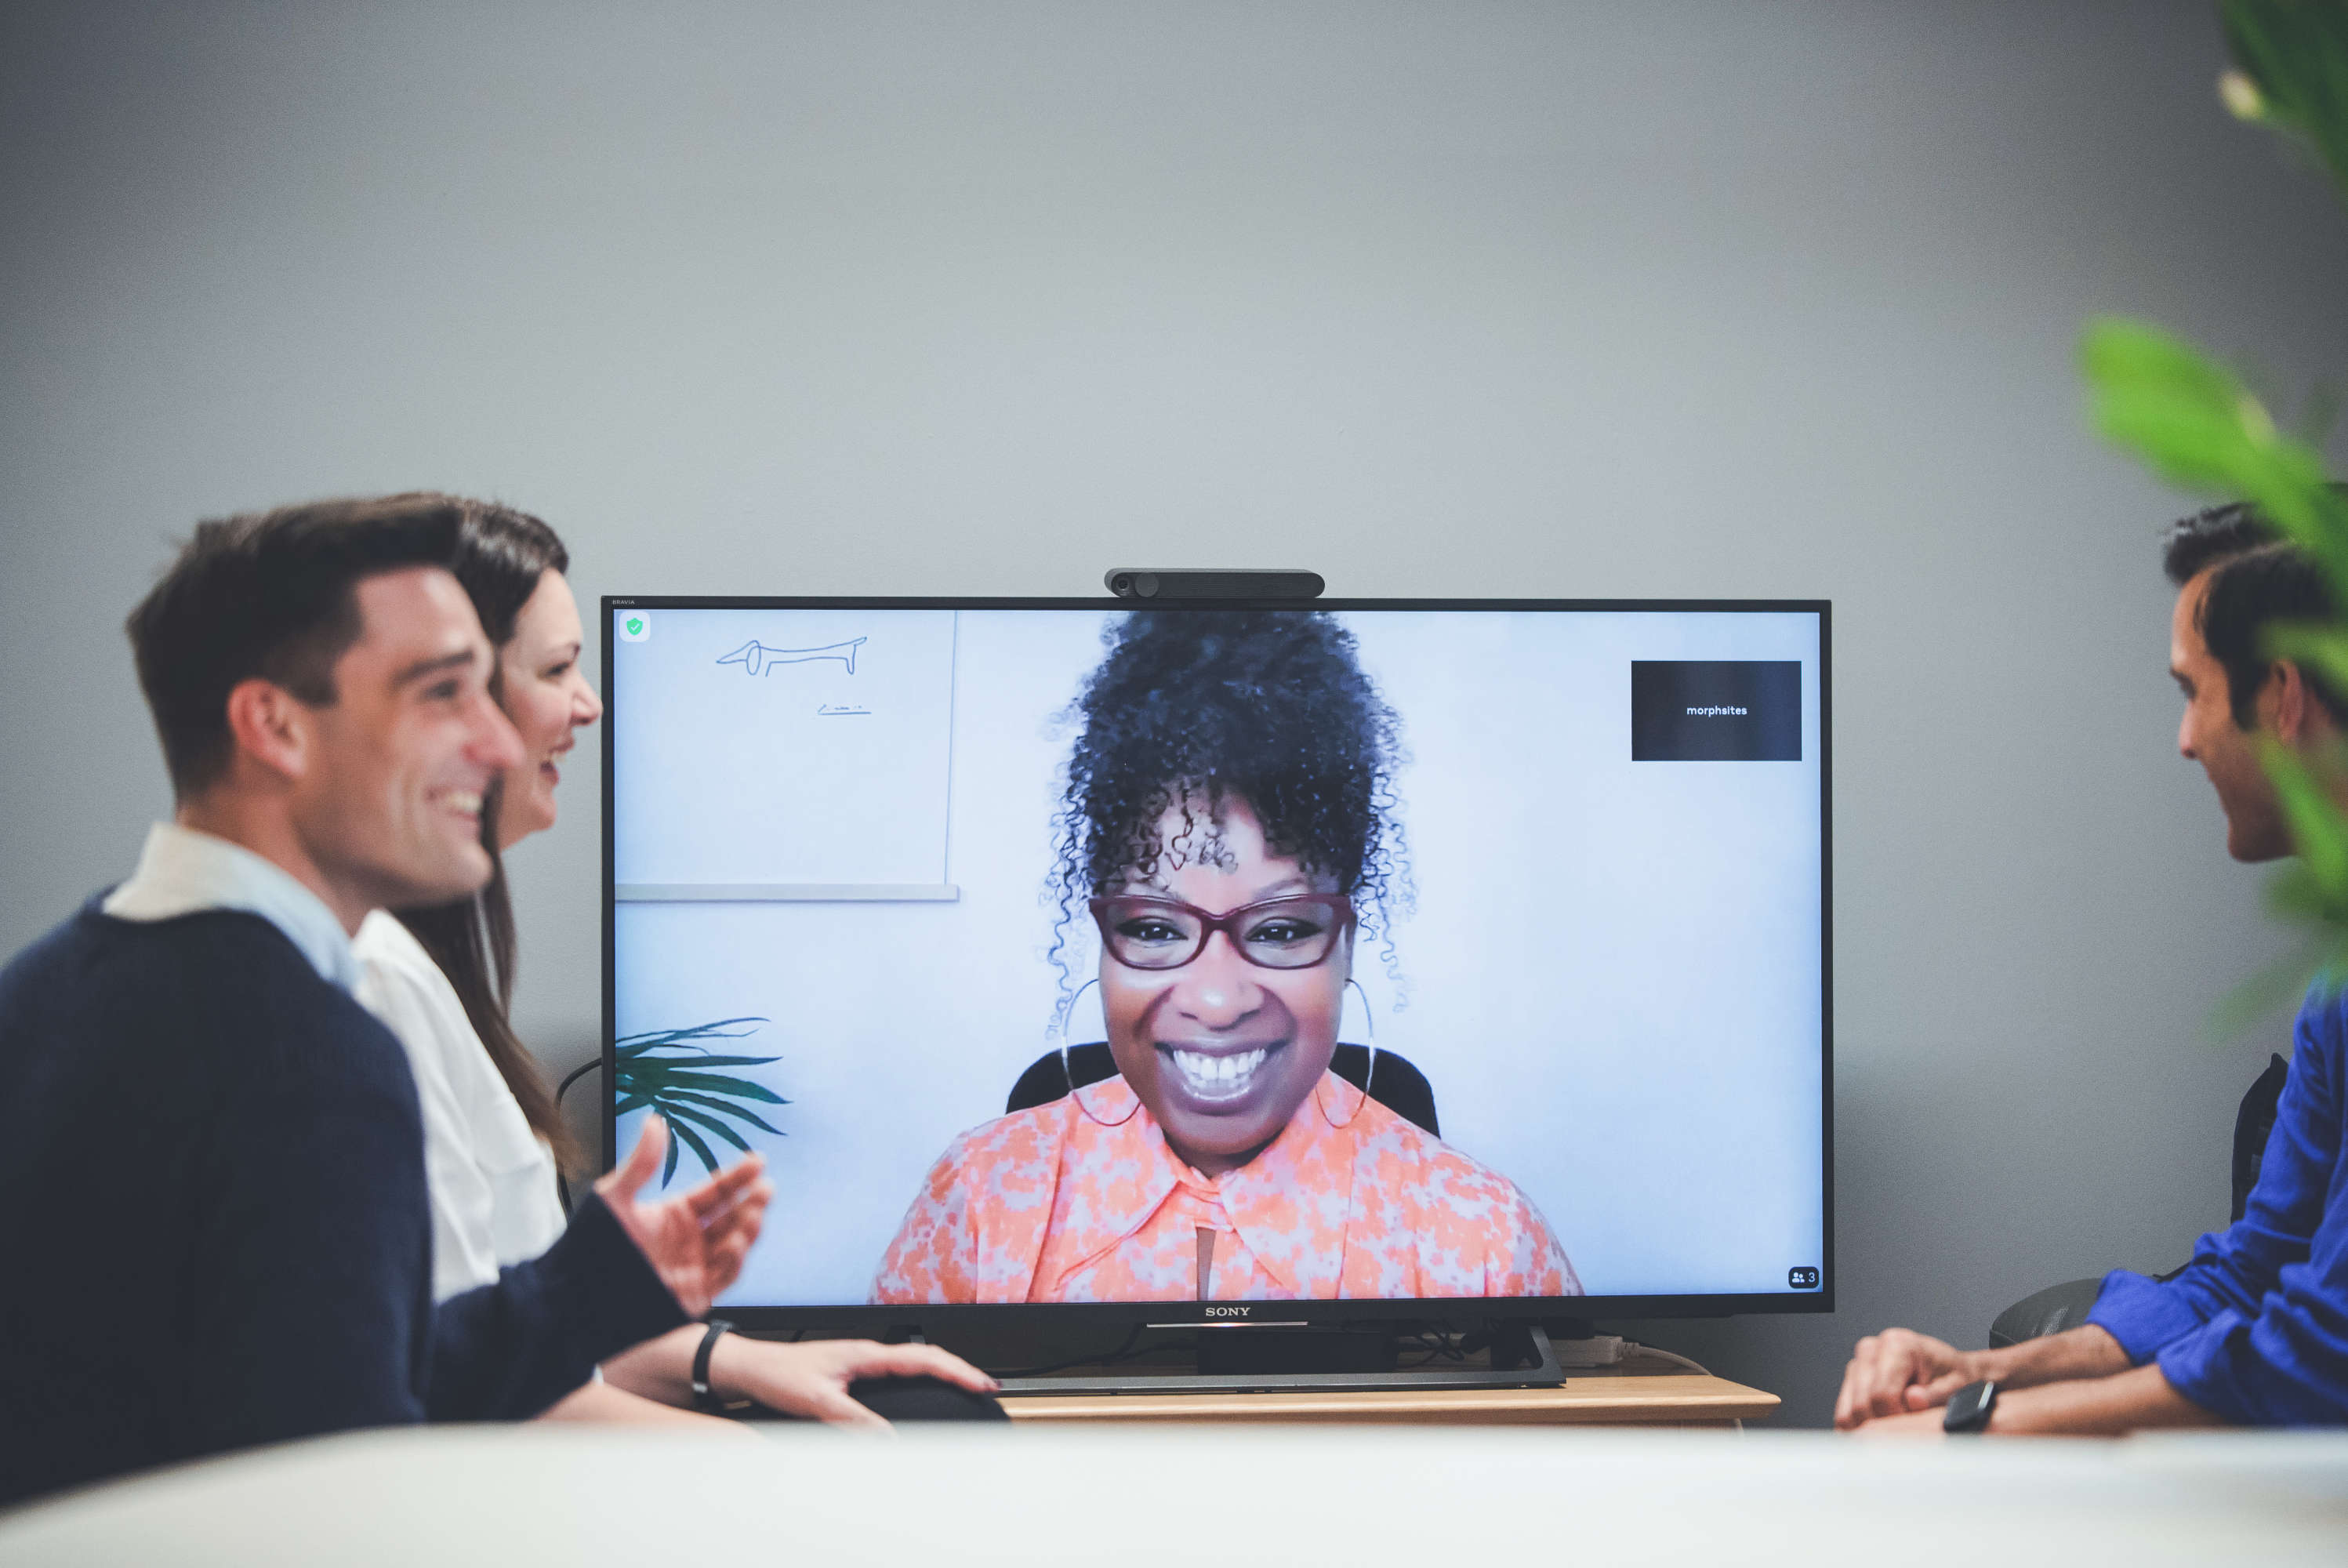 Project and client management team members catch up with a colleague via video call who appears on a large screen.